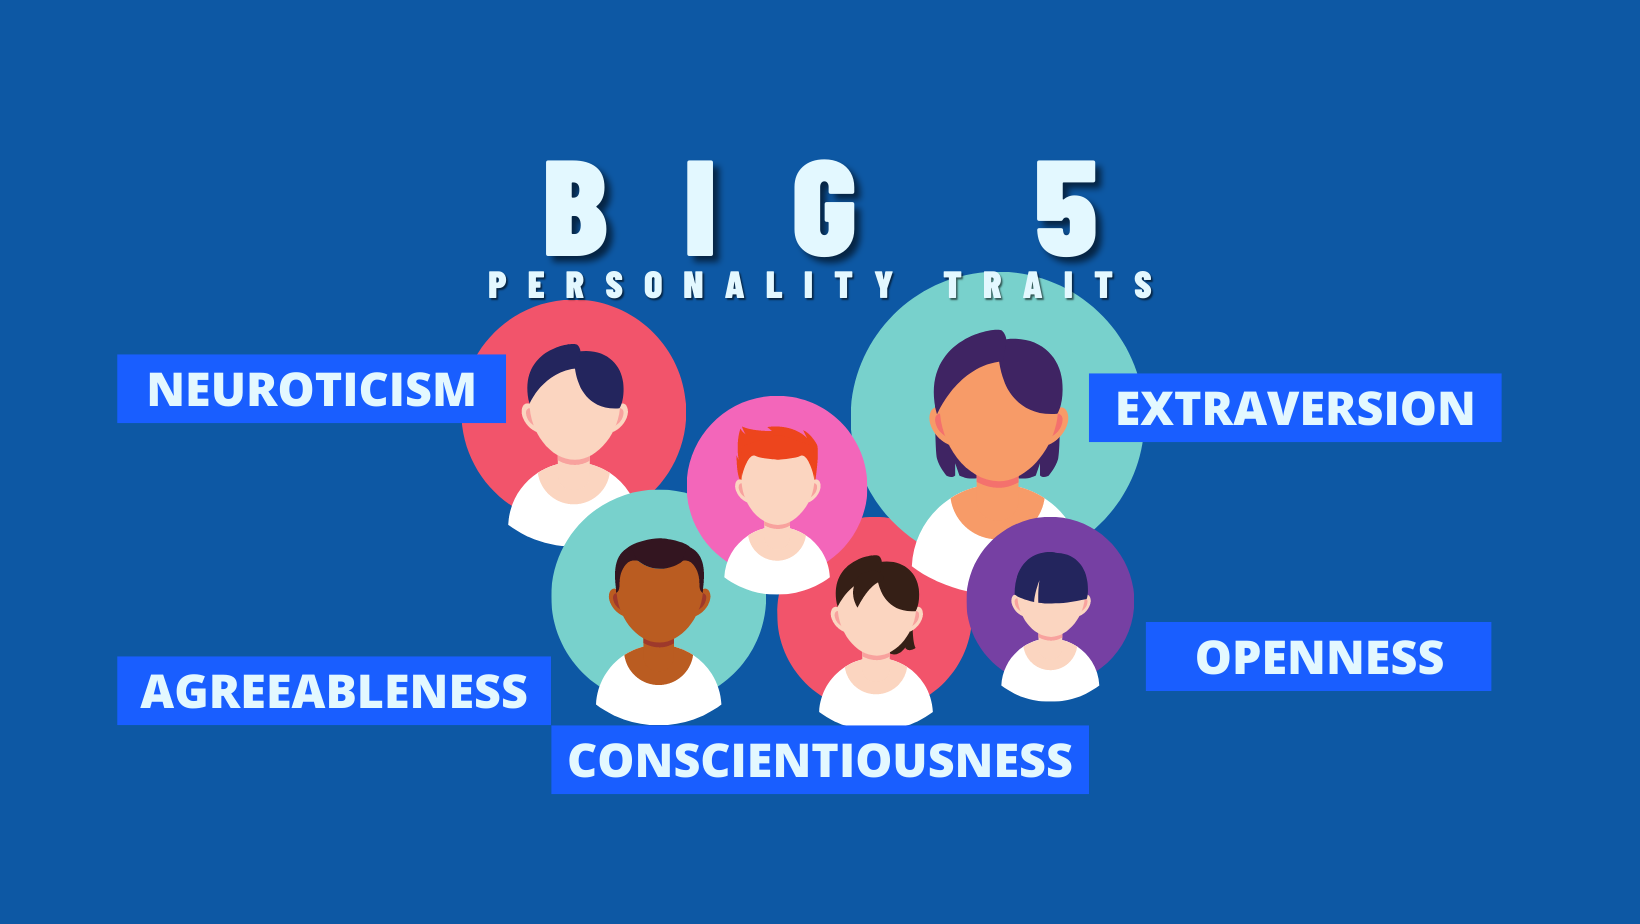 What are The Big 5 Personality Traits